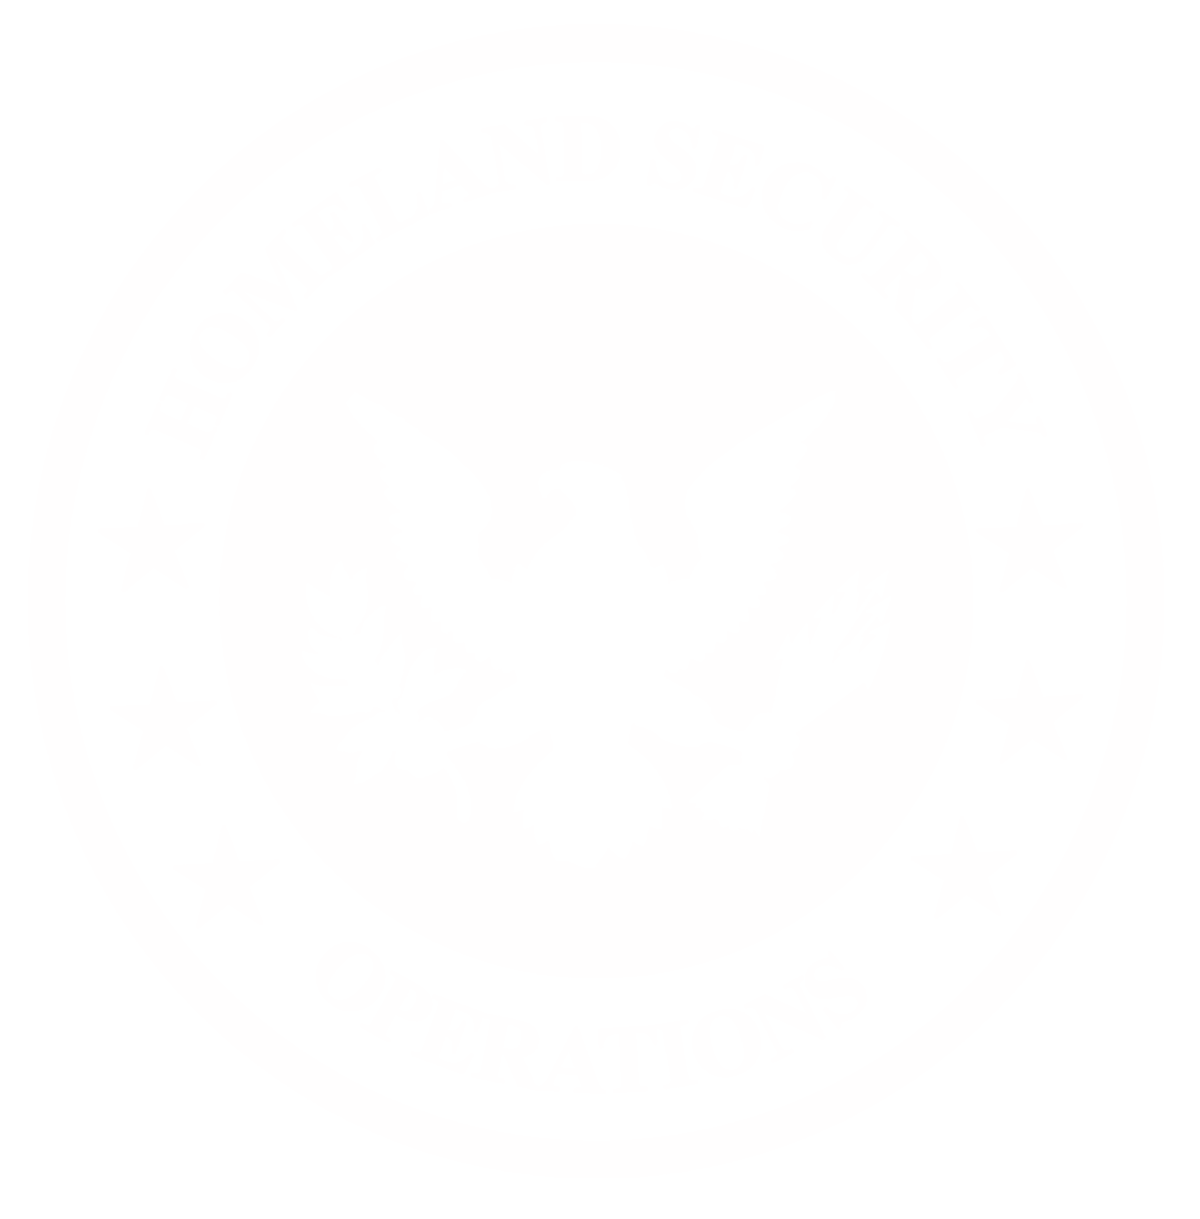 Homeland Security Operations